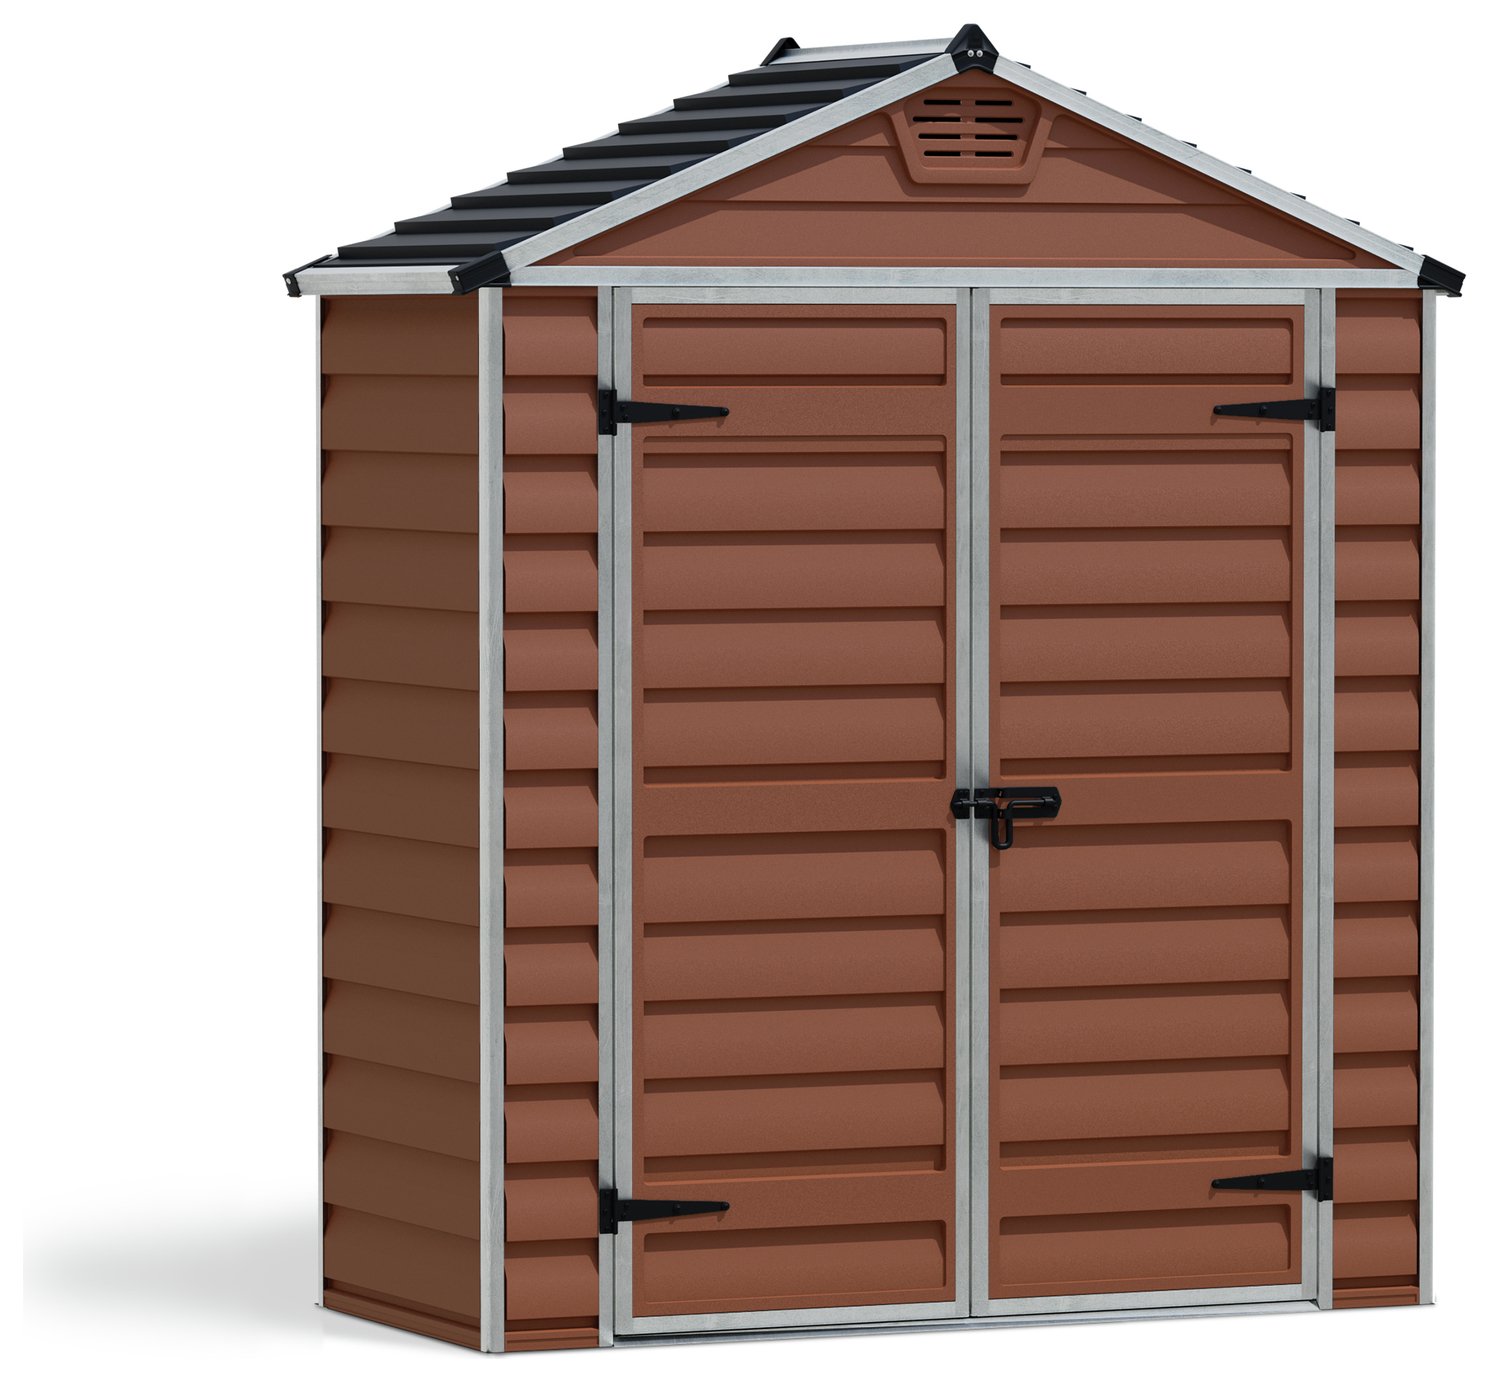 Keter Manor Plastic Shed 6x4 £289.99 Best Price